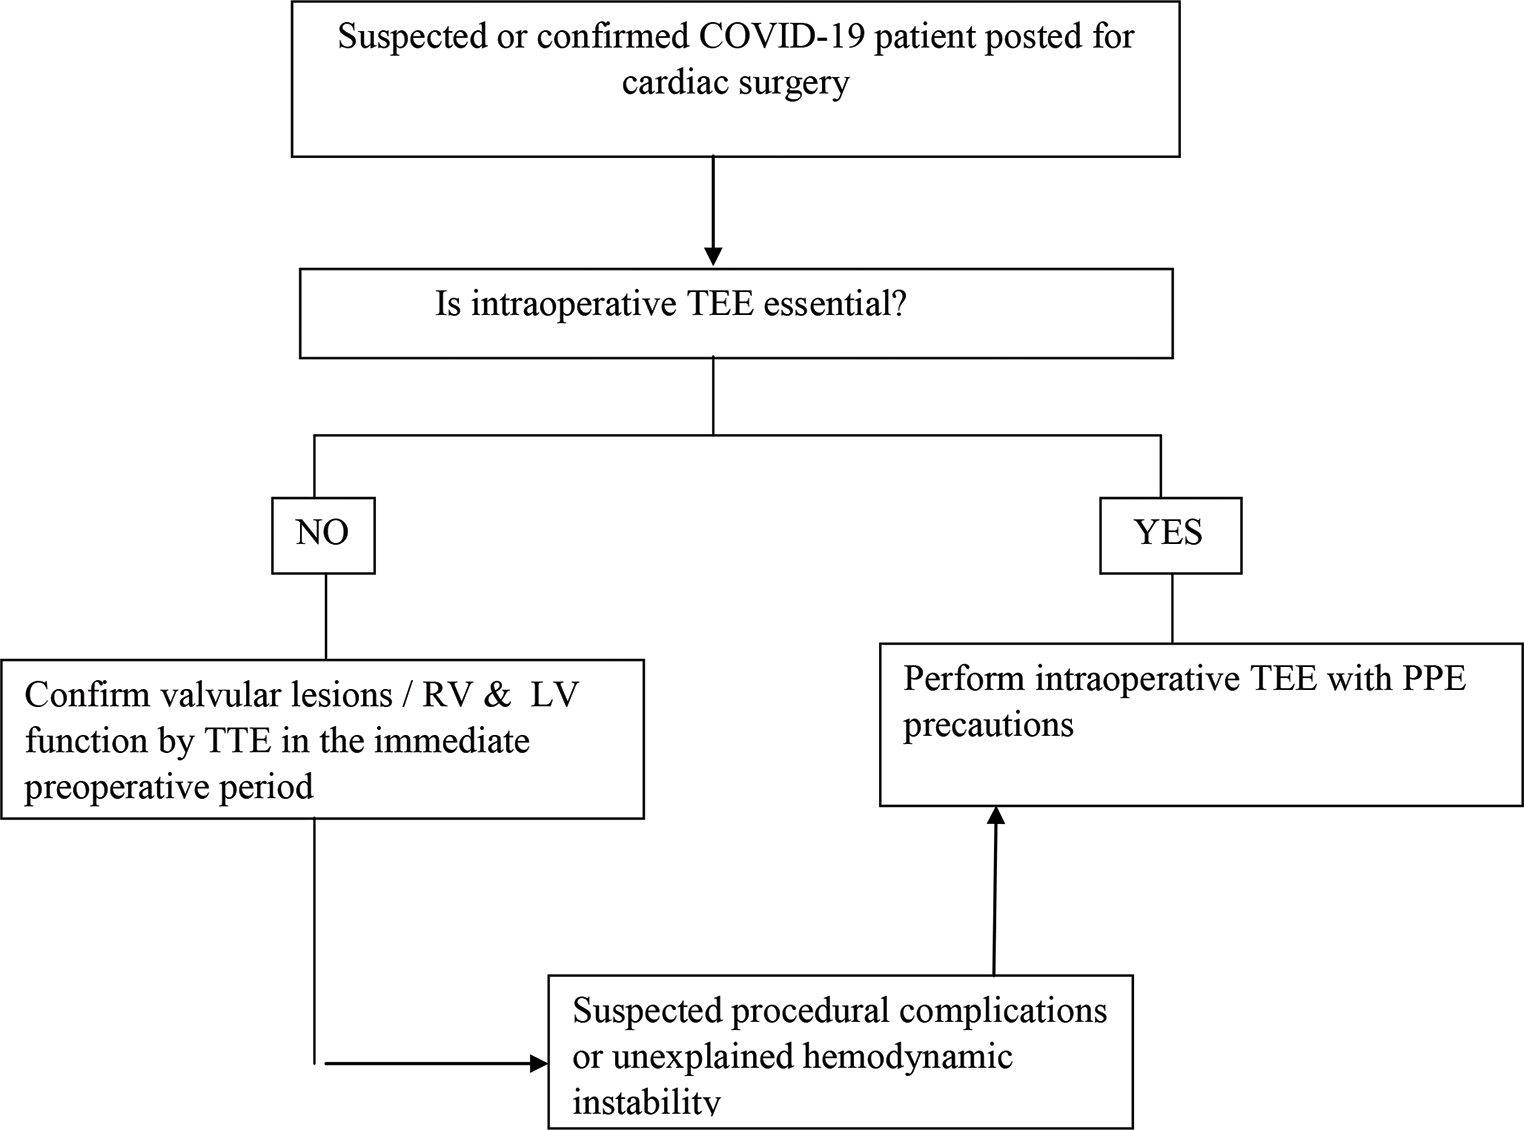 Indications for intraoperative transesophageal echocardiography (TEE)—American Society of Echocardiography algorithm. COVID-19, coronavirus disease 2019; PPE, personal protective equipment.